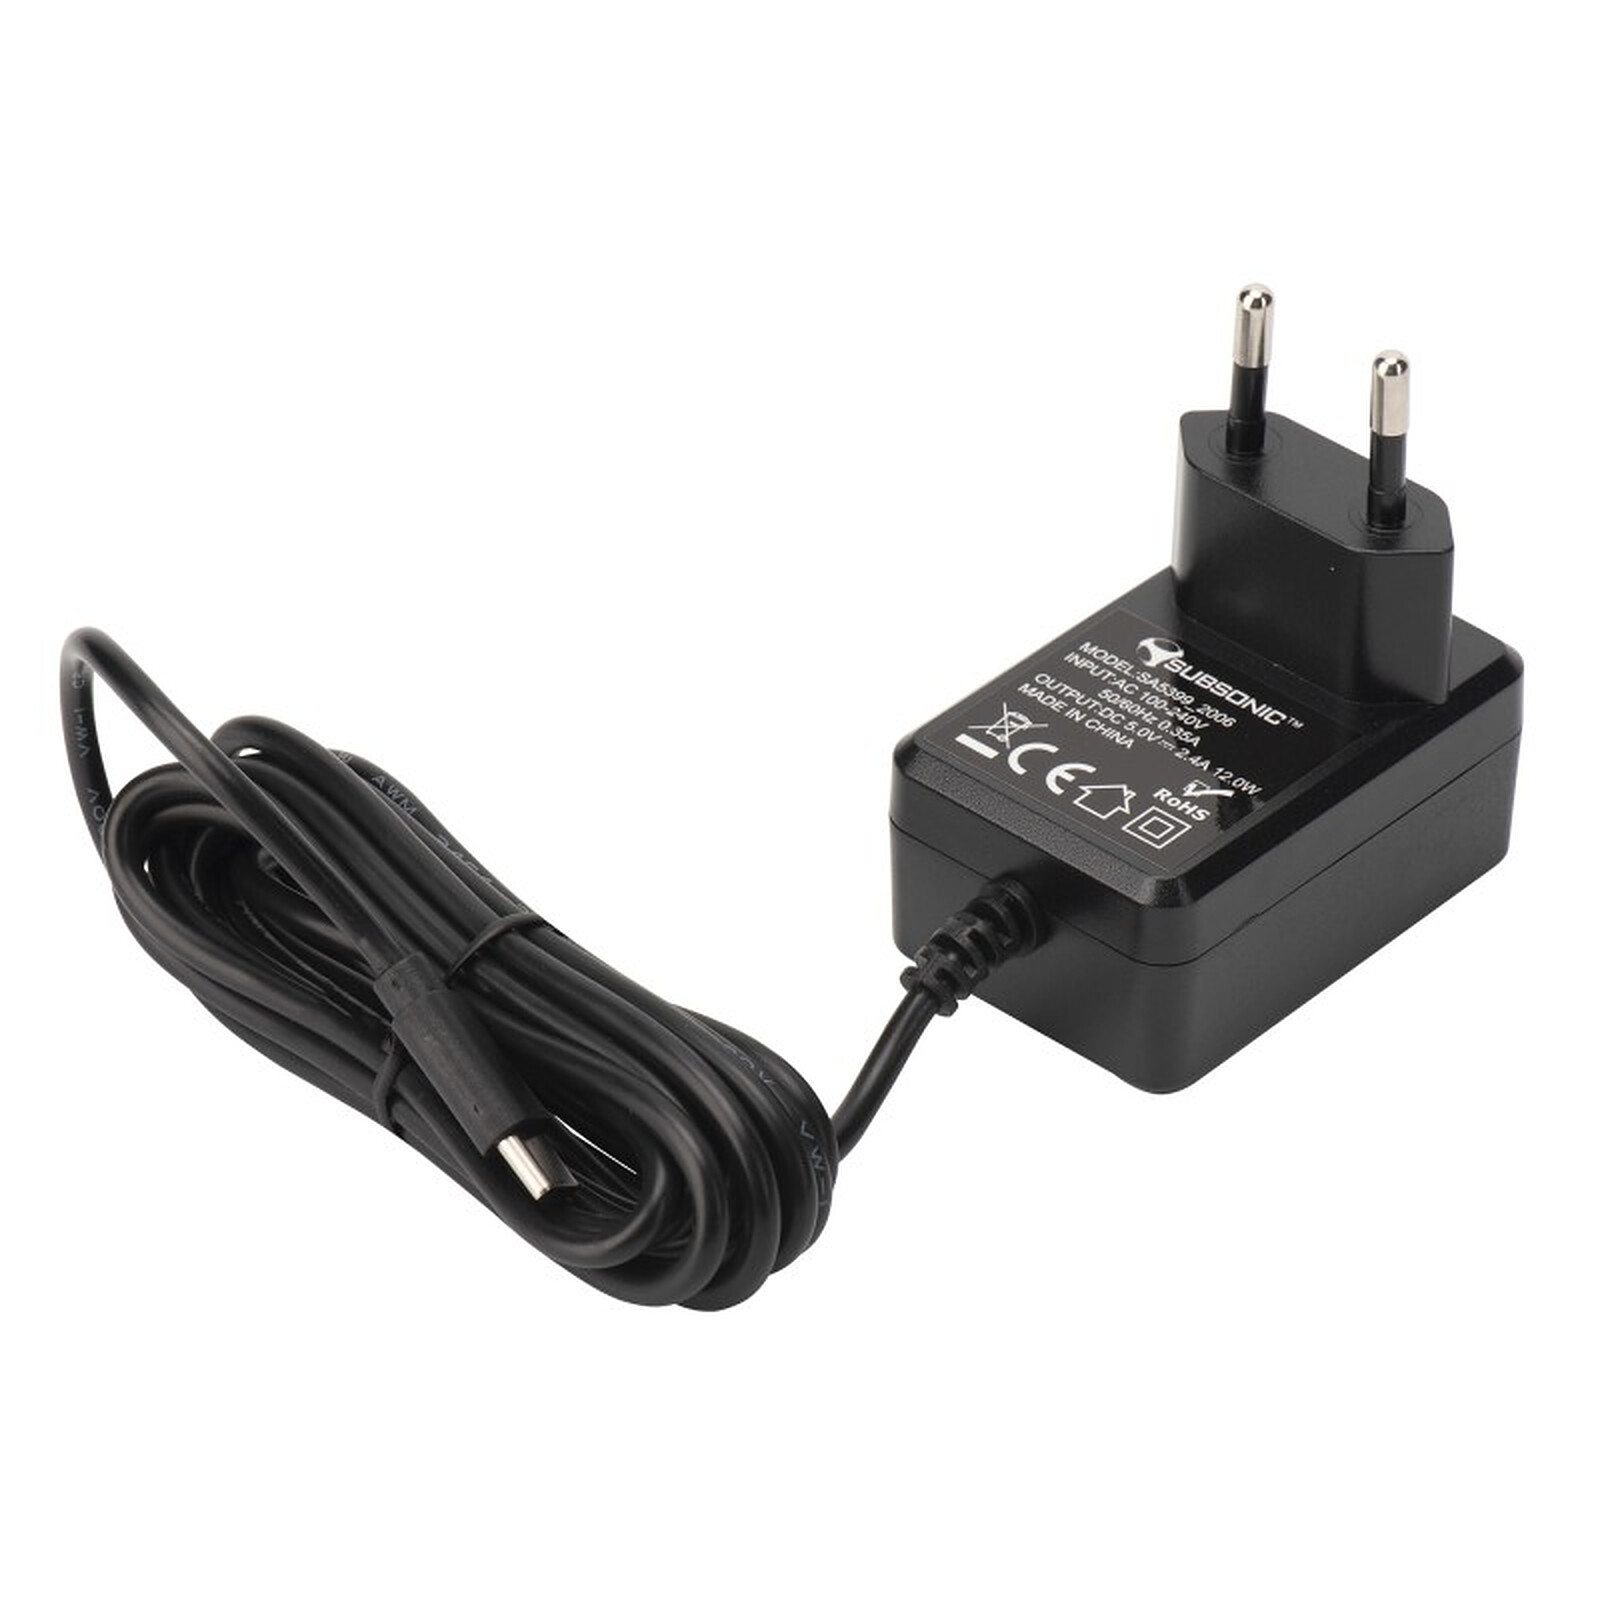 Subsonic Home Charger - Accessoires Switch - LDLC